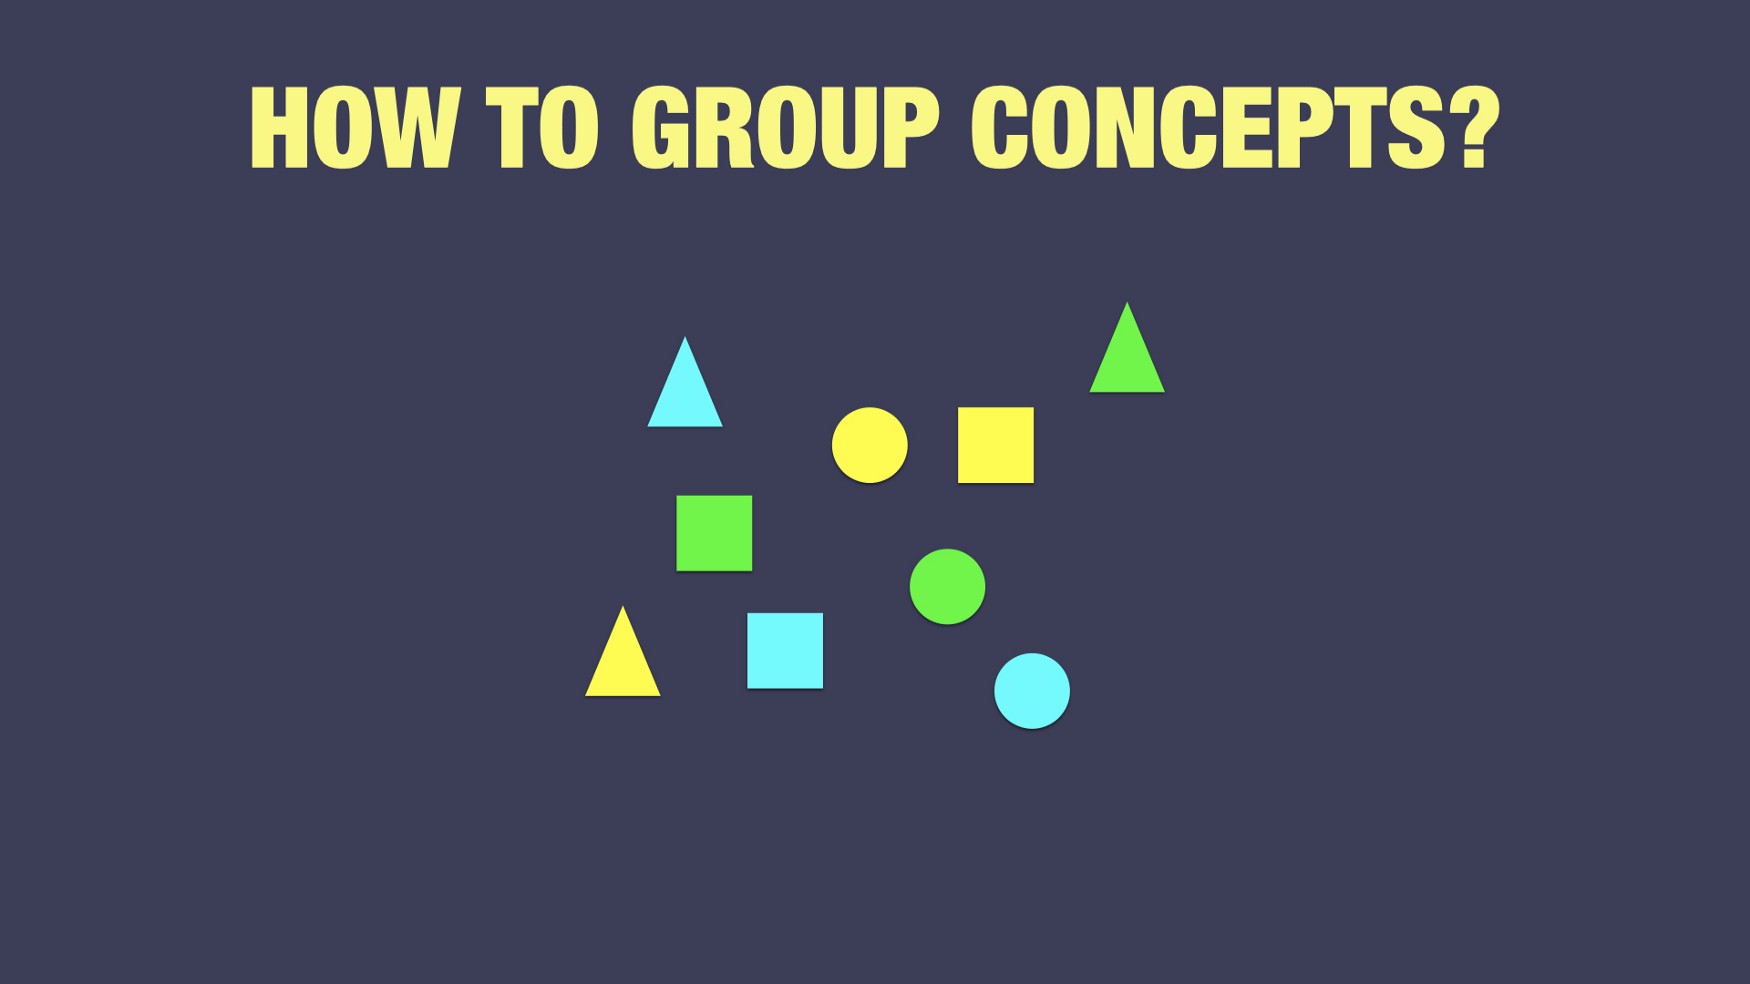 How to group these concepts into domains